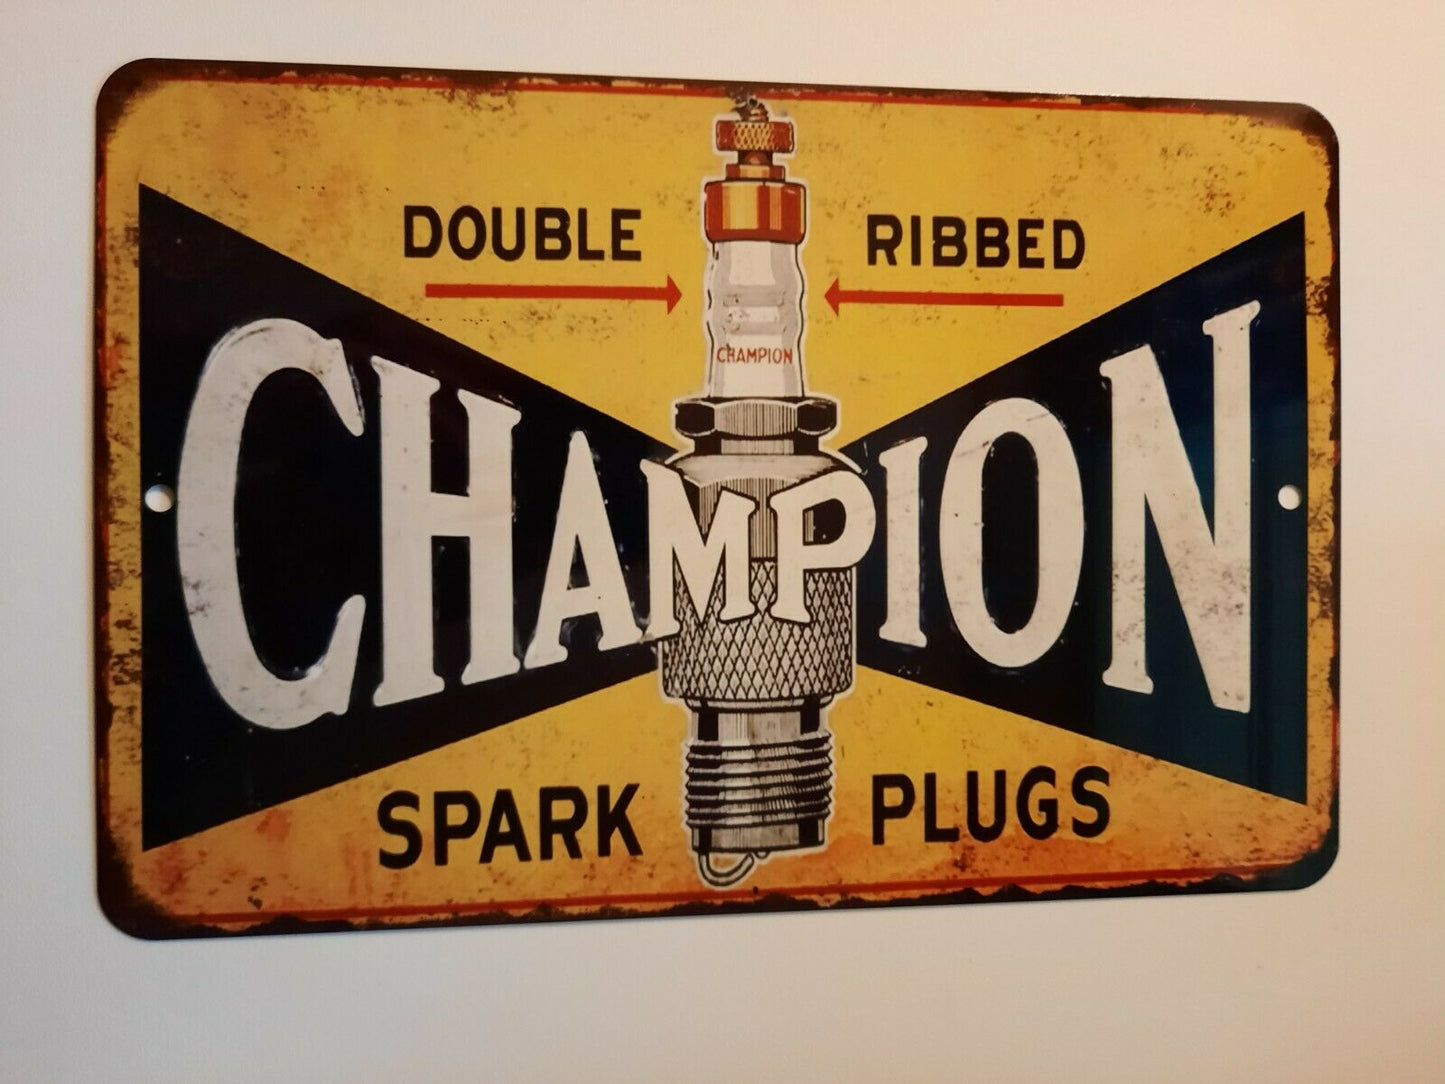 CHAMPION Double Ribbed Spark Plugs Vintage Ad 8x12 Metal Wall Sign Garage Poster